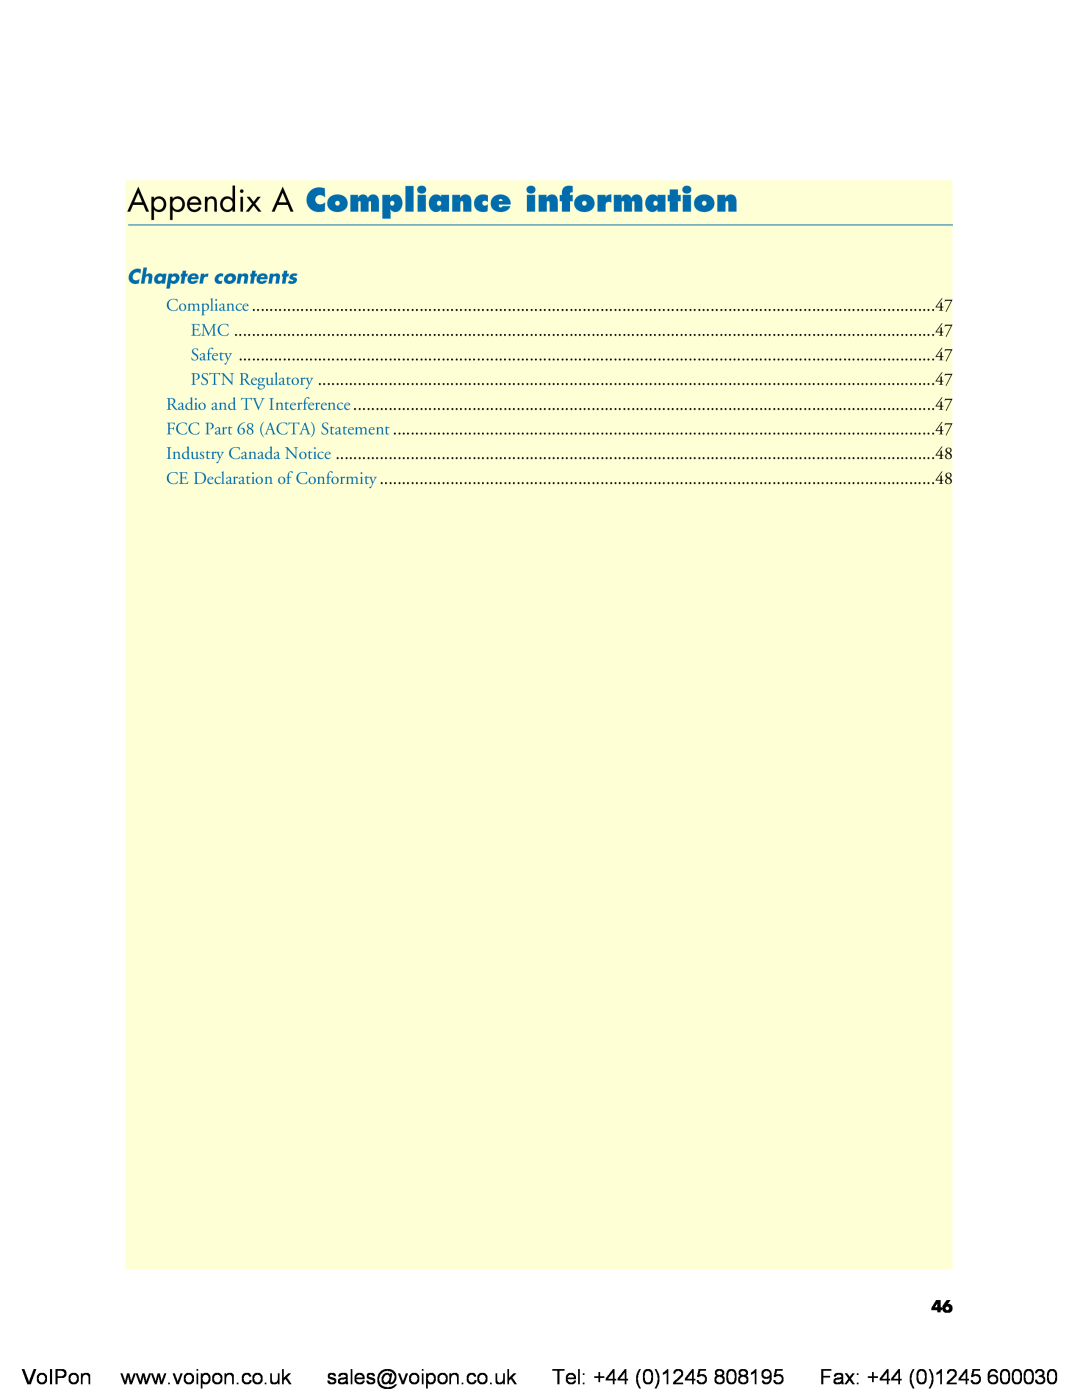 Patton electronic 4960 manual Appendix A Compliance information, Chapter contents, Safety, PSTN Regulatory 